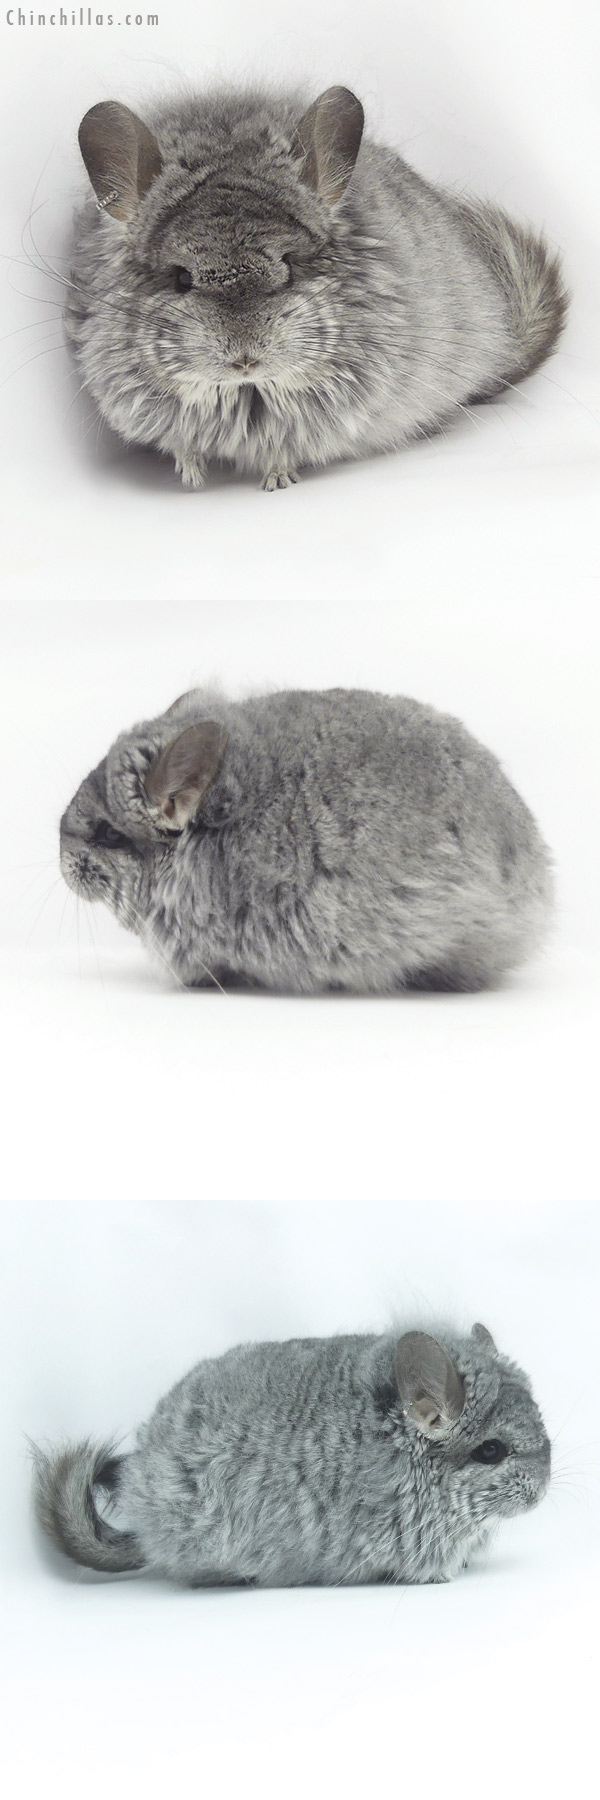 Chinchilla or related item offered for sale or export on Chinchillas.com - 20091 Standard  Royal Persian Angora Female Chinchilla